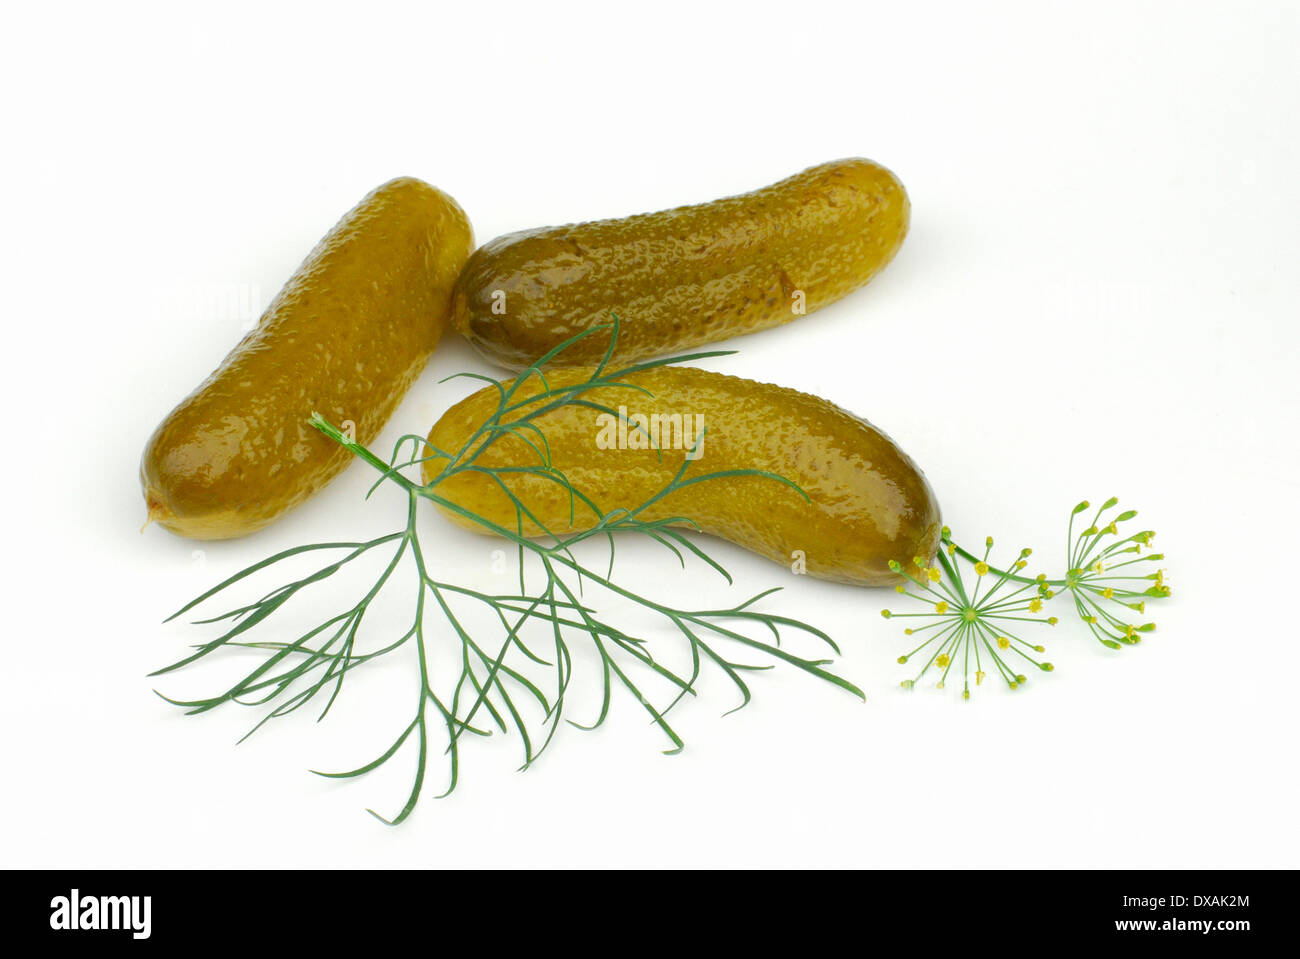 Dill and Gherkin Stock Photo